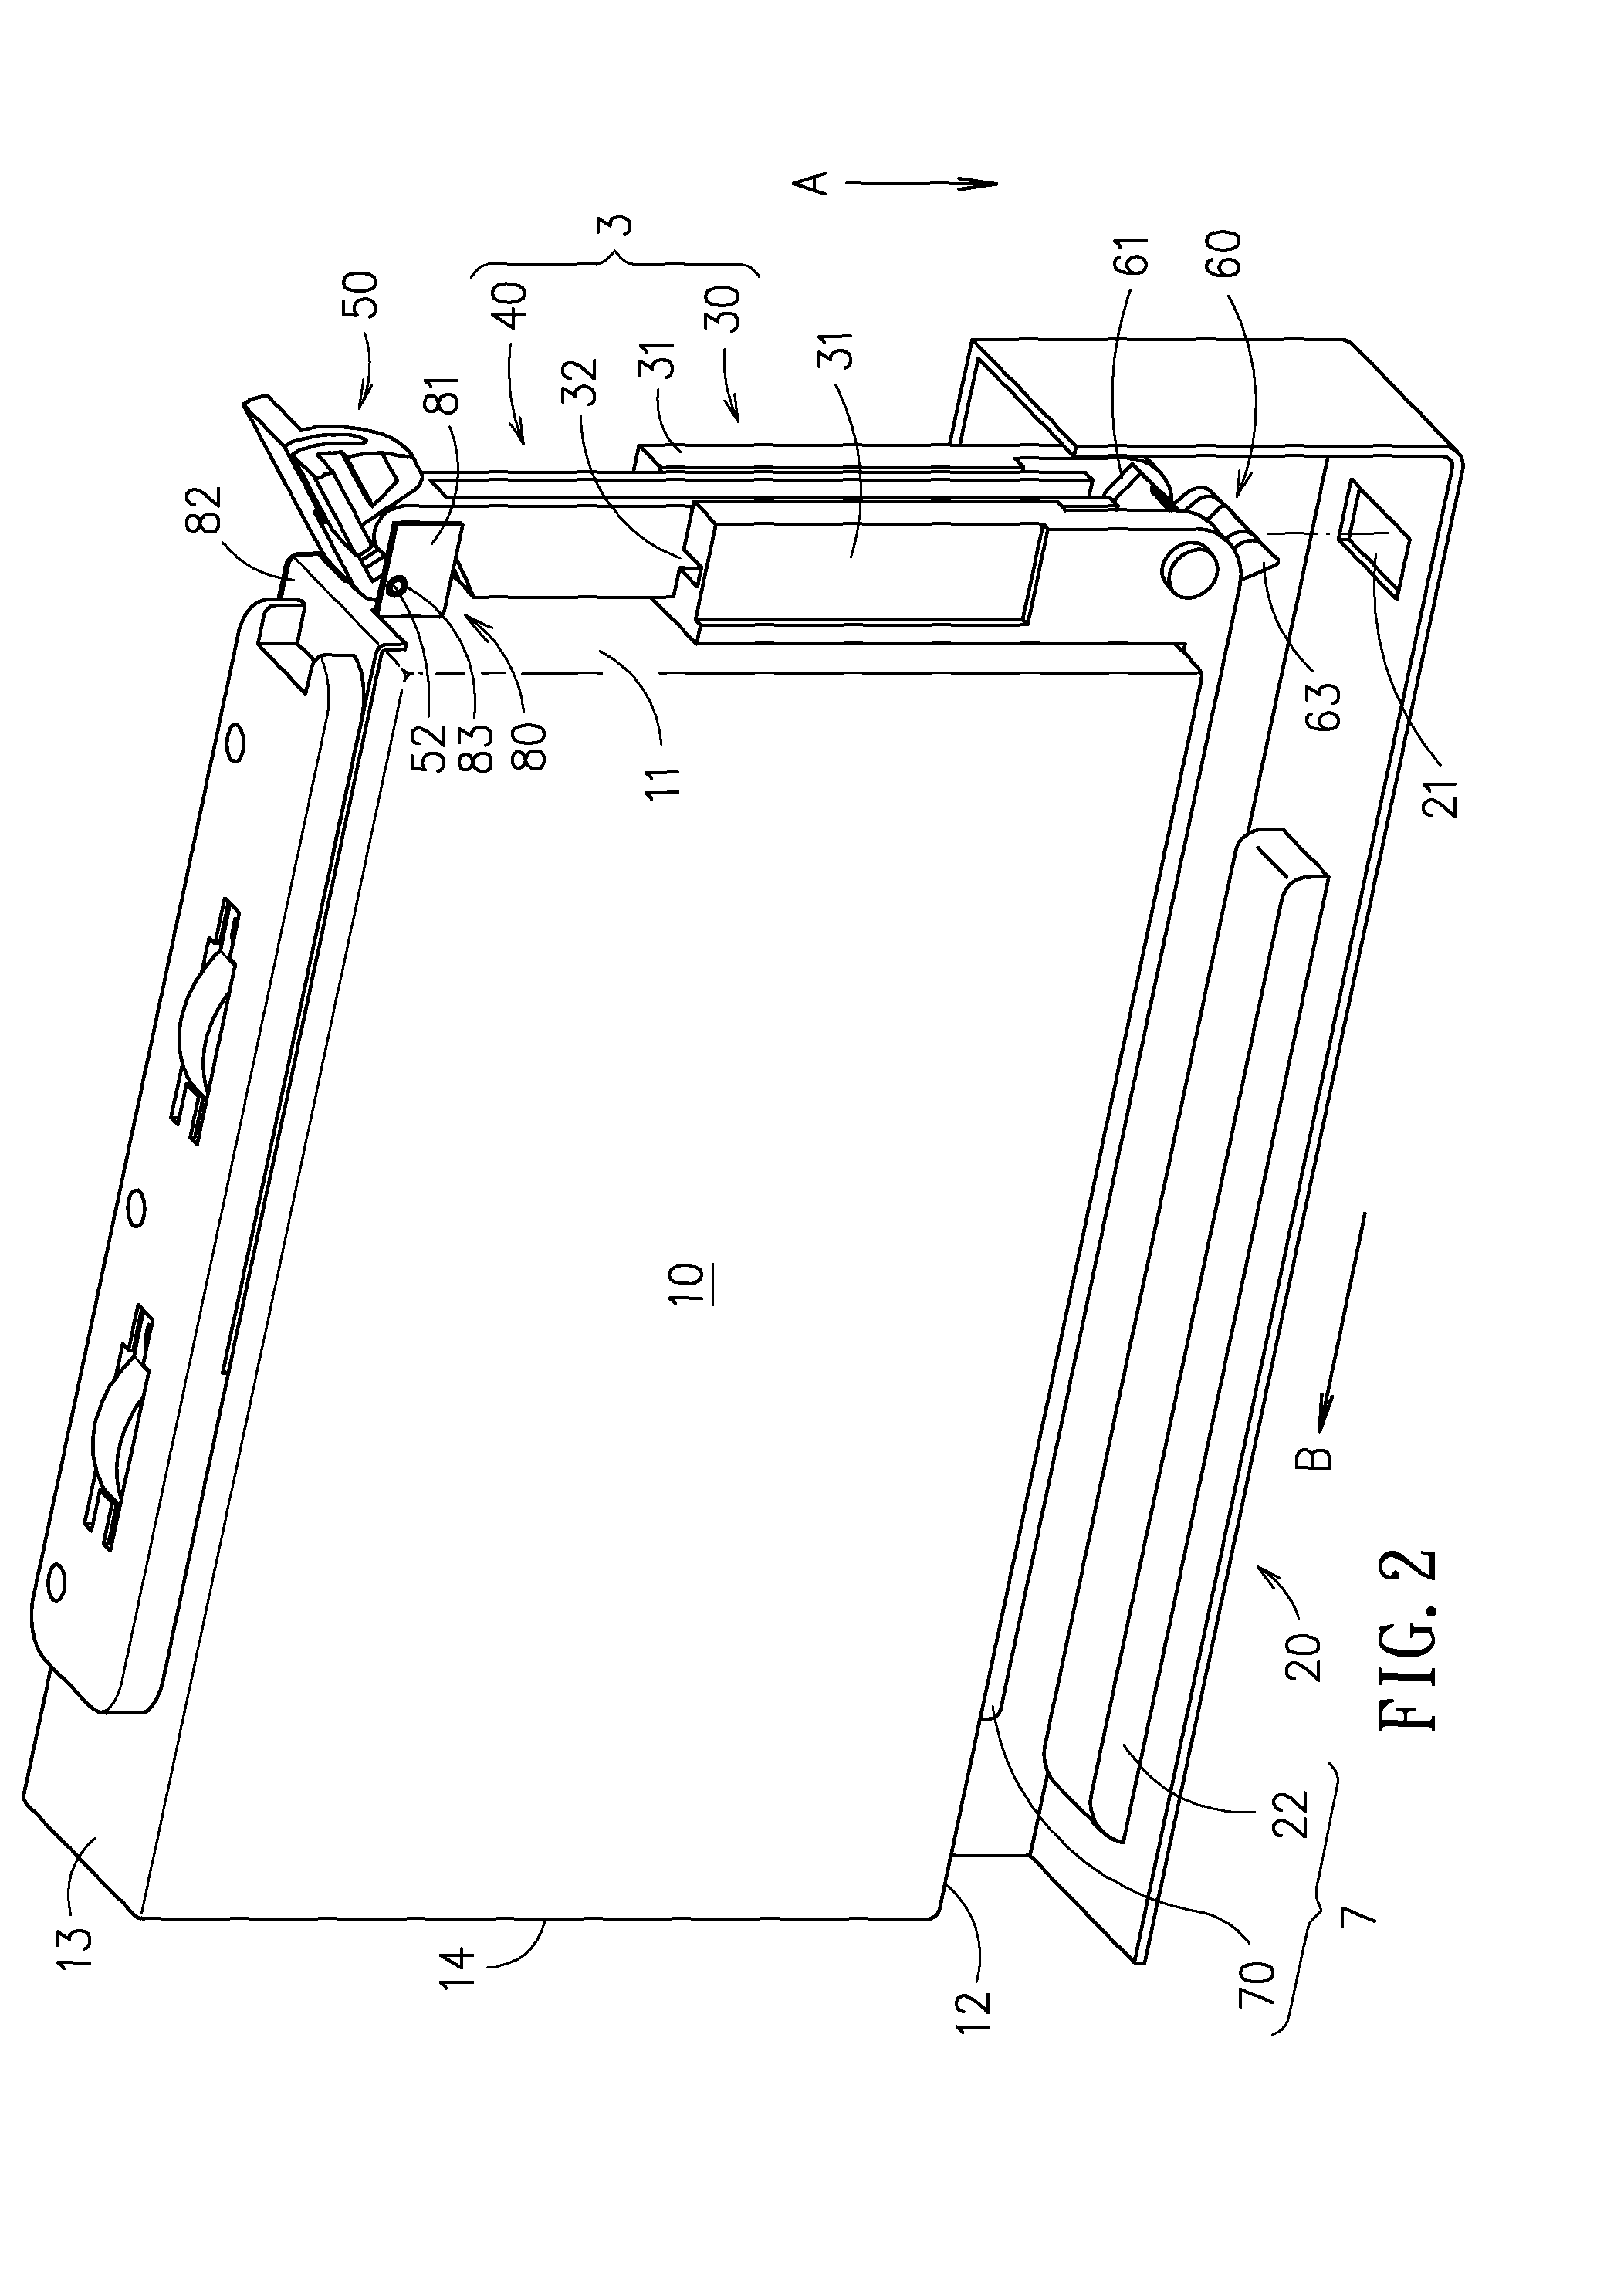 Extracting and installing structure for electrical device